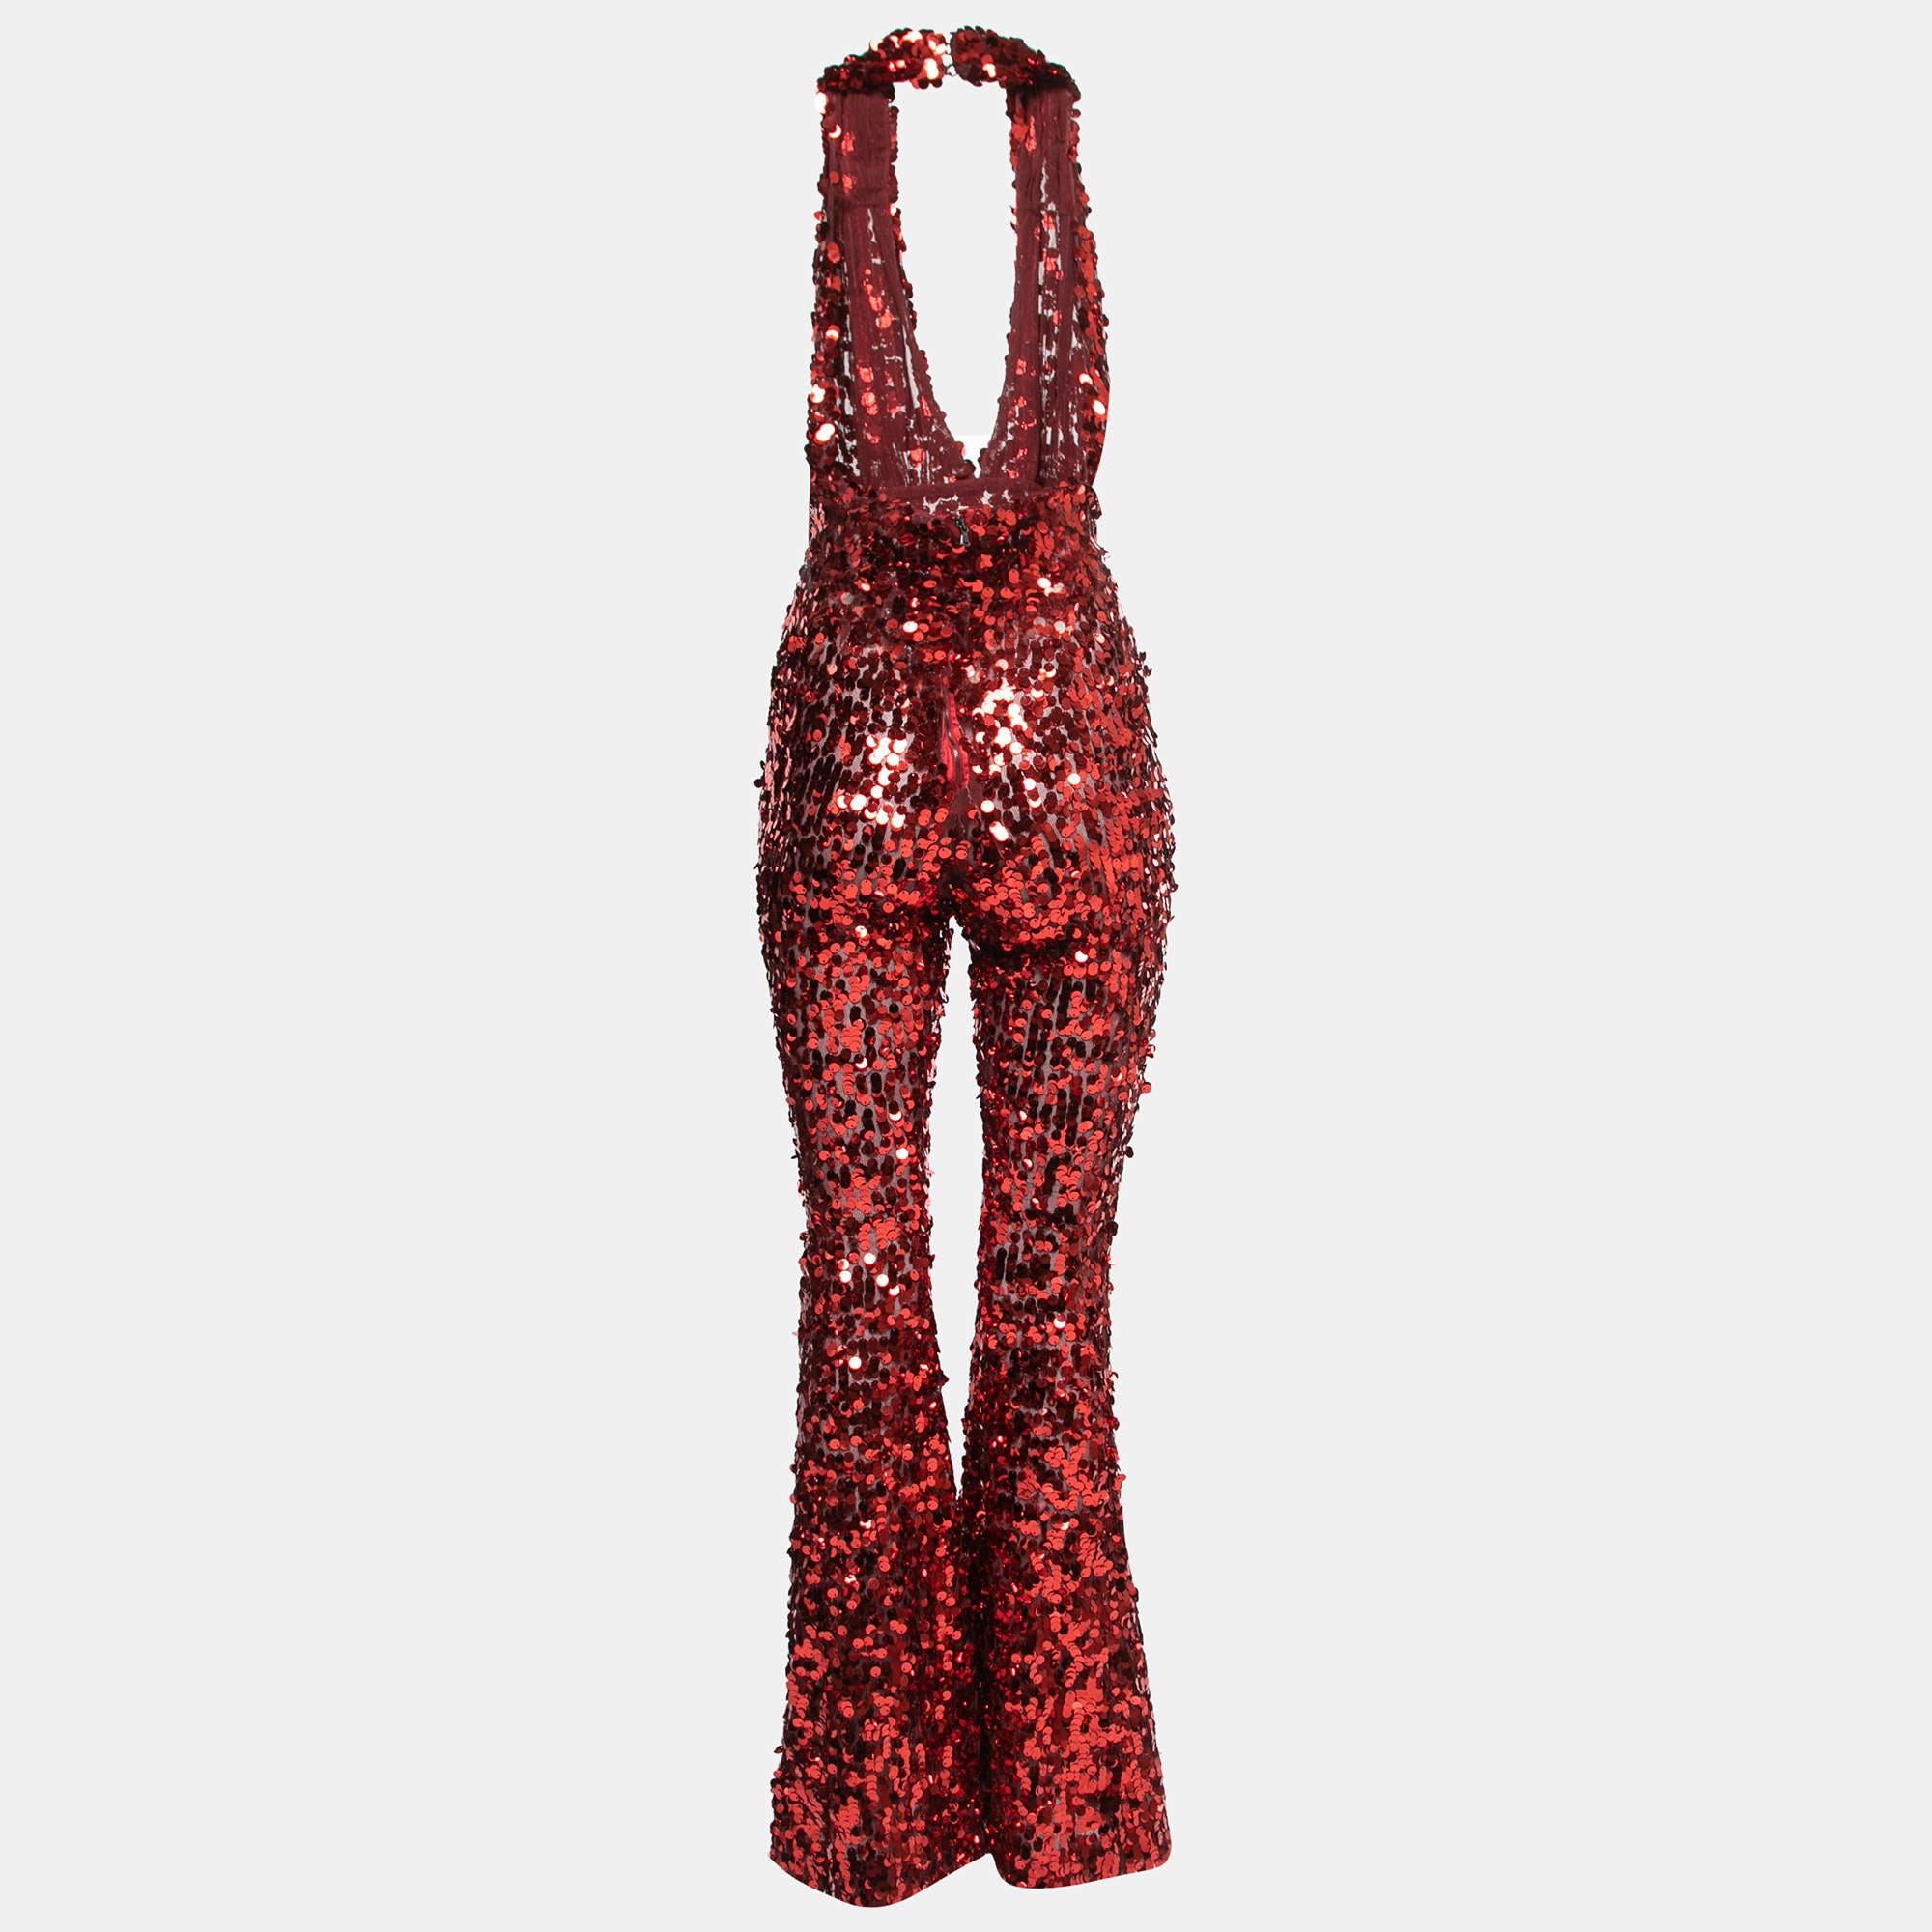 It's time you got a gorgeous jumpsuit, and what better than this one from Dolce & Gabbana? It is made of the finest materials. Team it with pumps.

